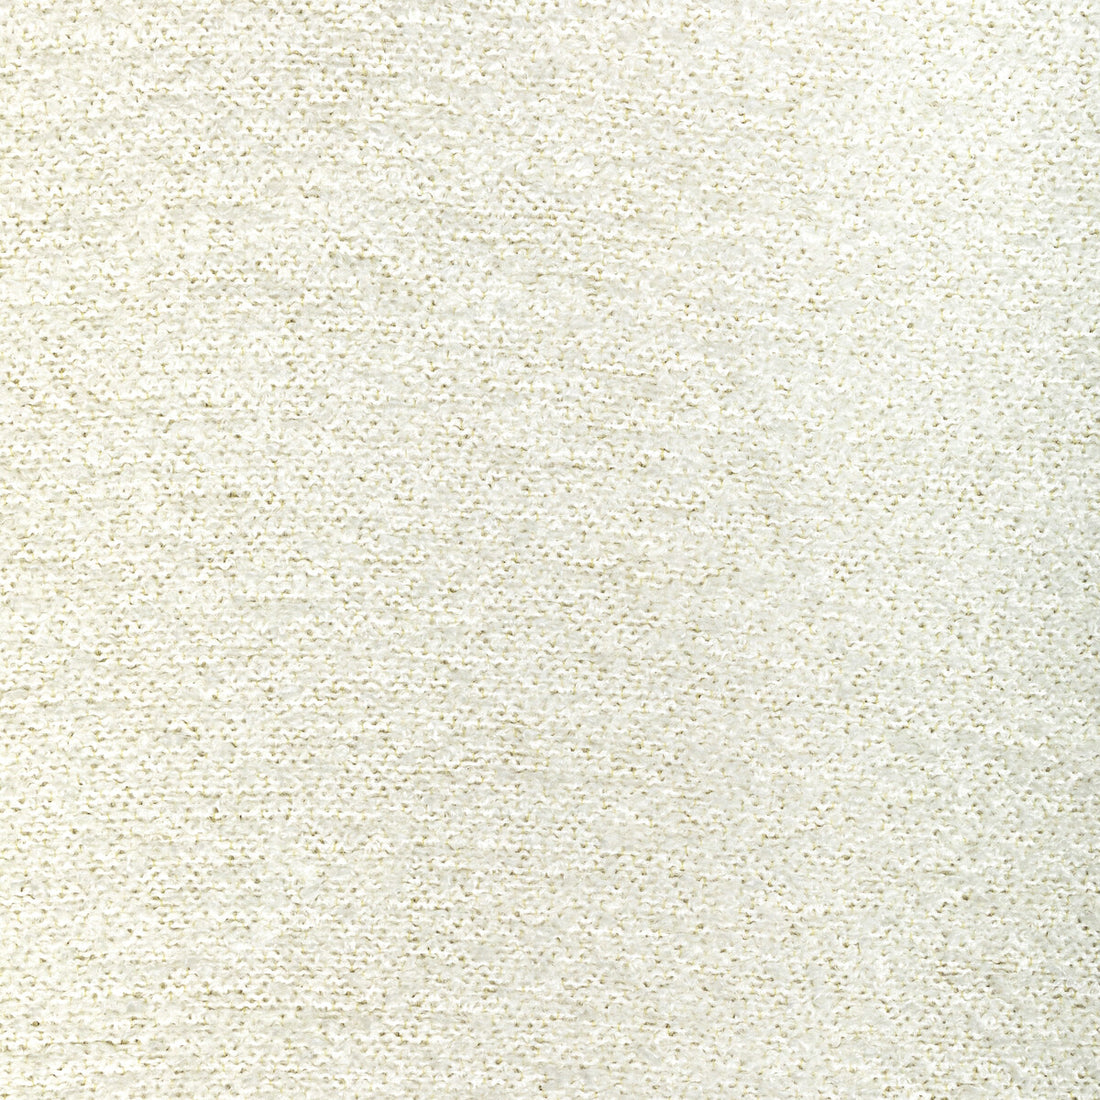 Unfray fabric in ivory color - pattern 36399.101.0 - by Kravet Couture in the Jan Showers Charmant collection